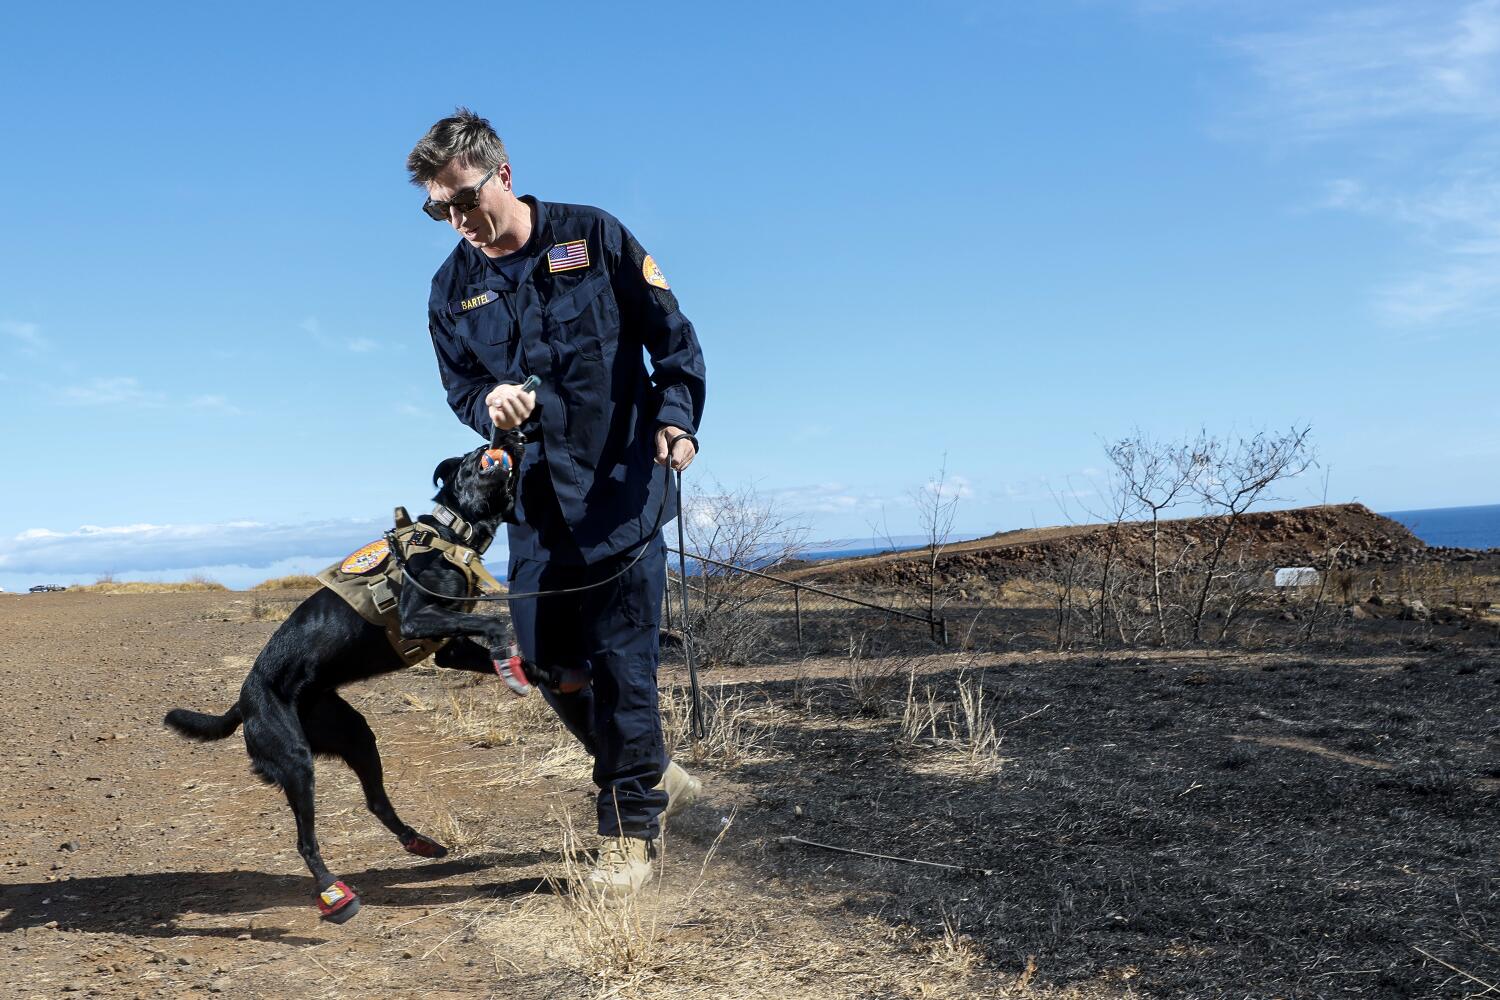 'All go and no brake': Tireless L.A. cadaver dogs search Lahaina for human remains  